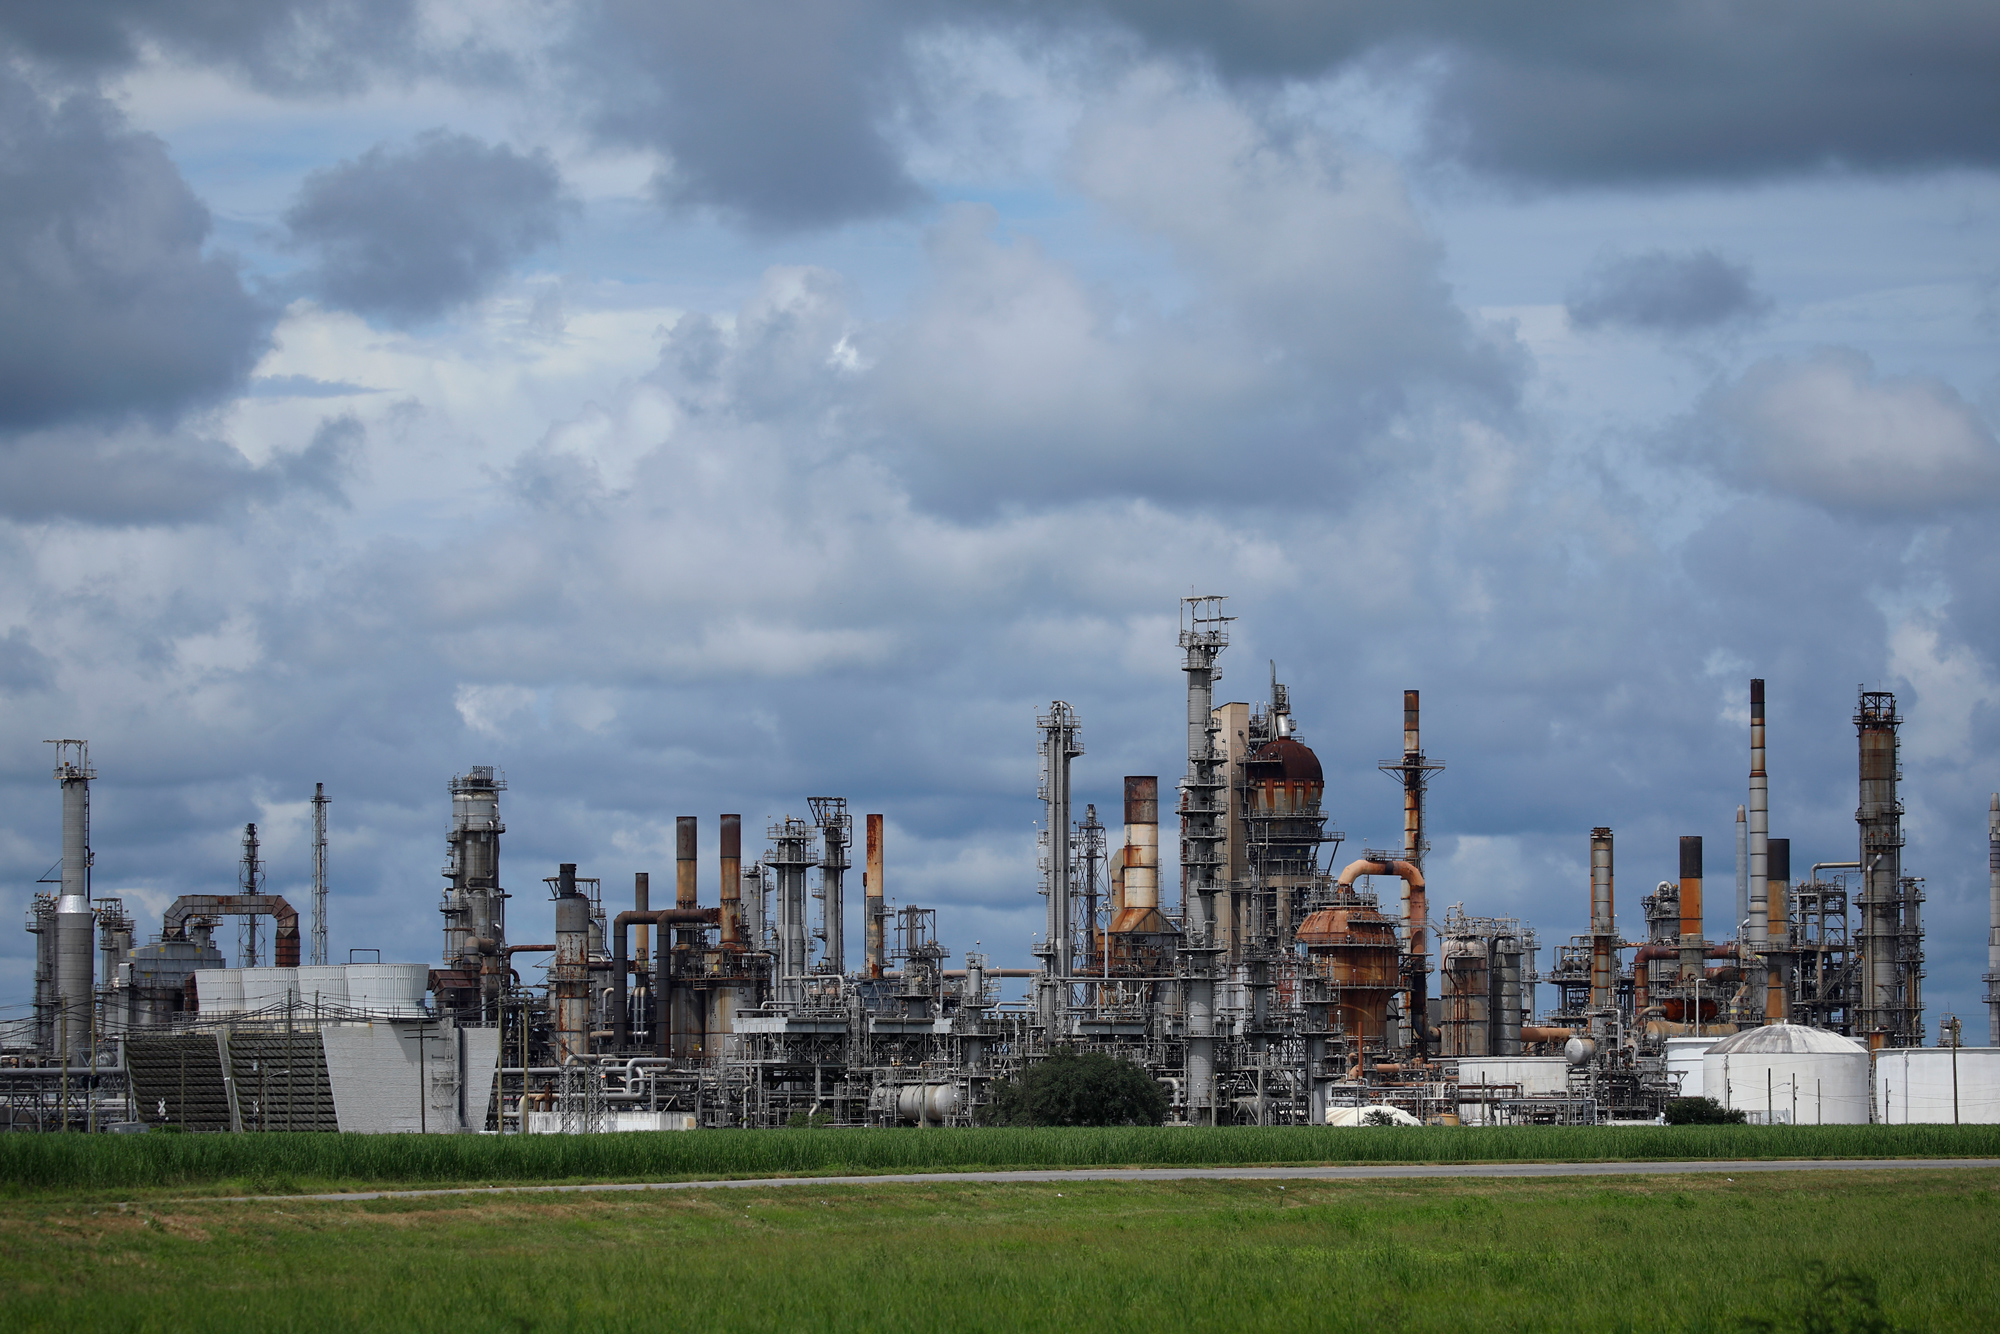 The Royal Dutch Shell Plc Convent Refinery is seen ahead of Hurricane Ida, on Saturday, August 28 in Convent, Louisiana.